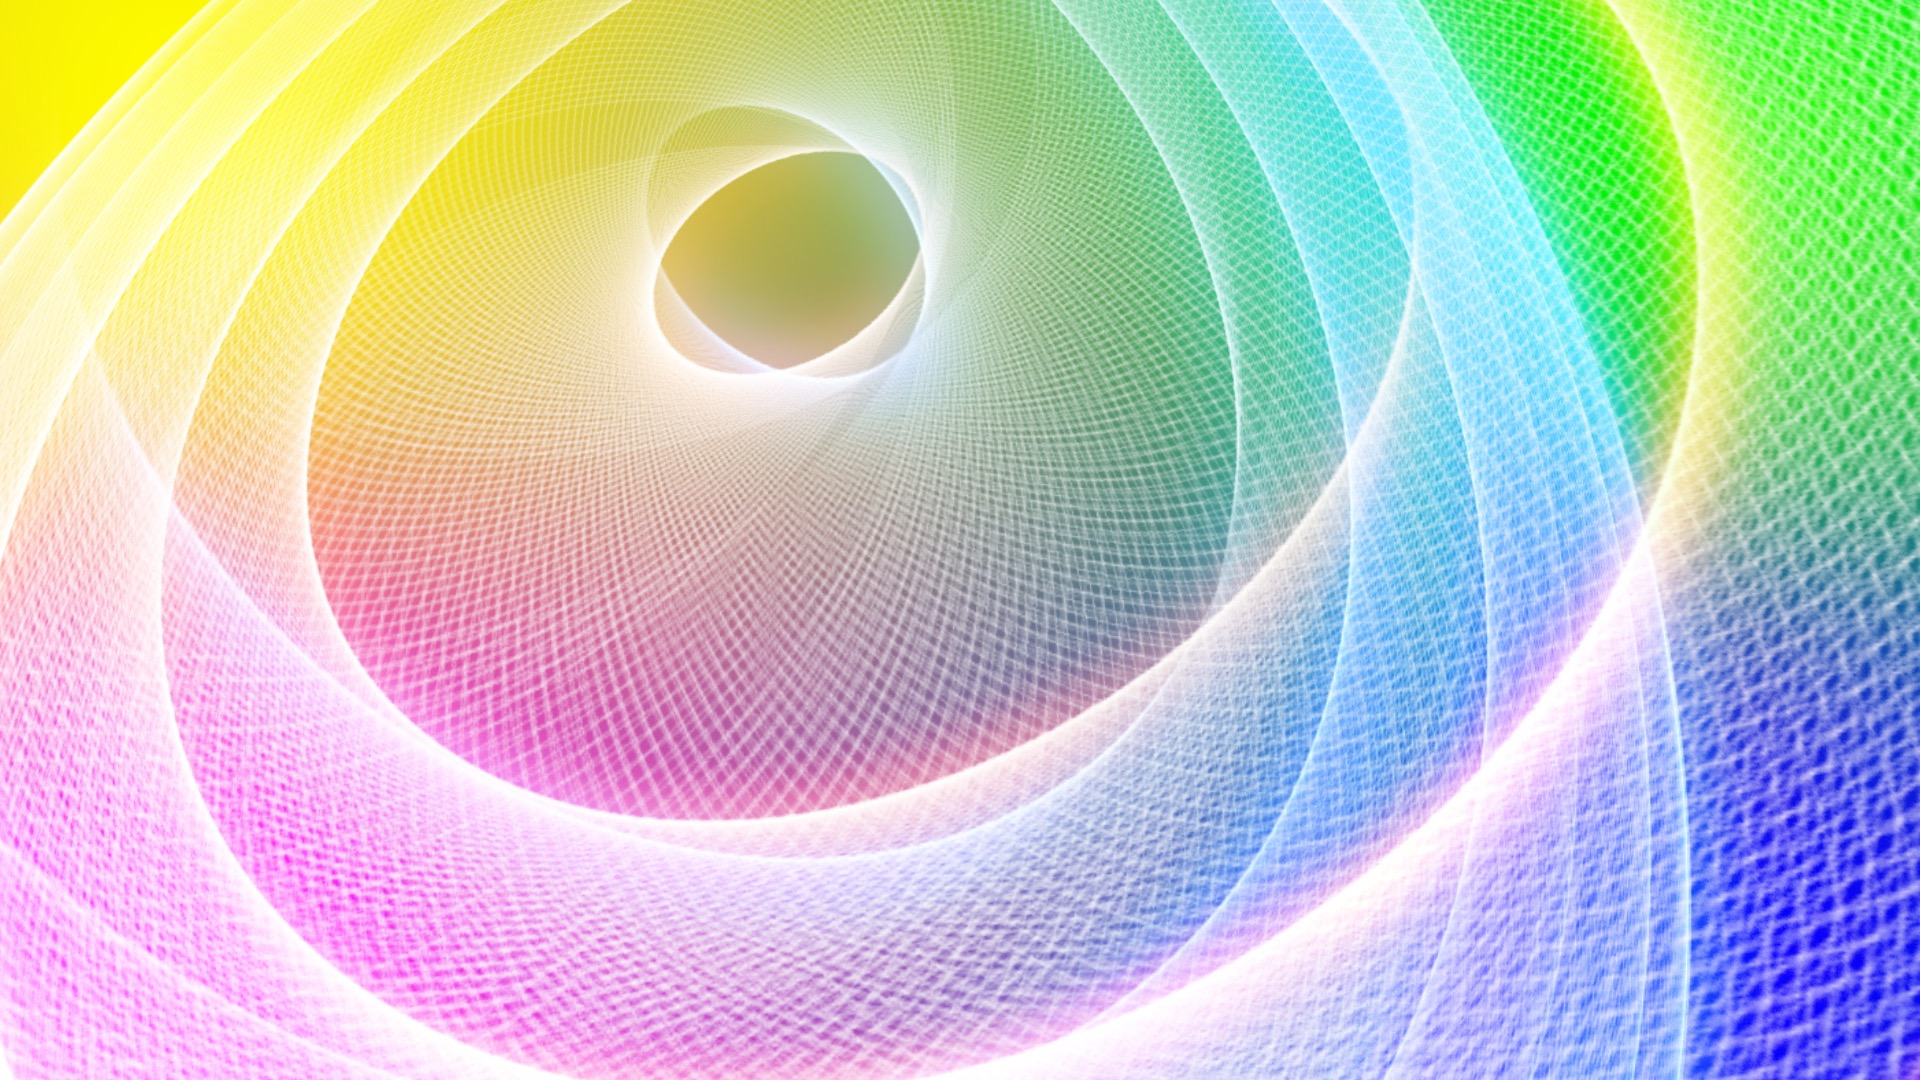 Turn circle colorful backgrounds stock footages